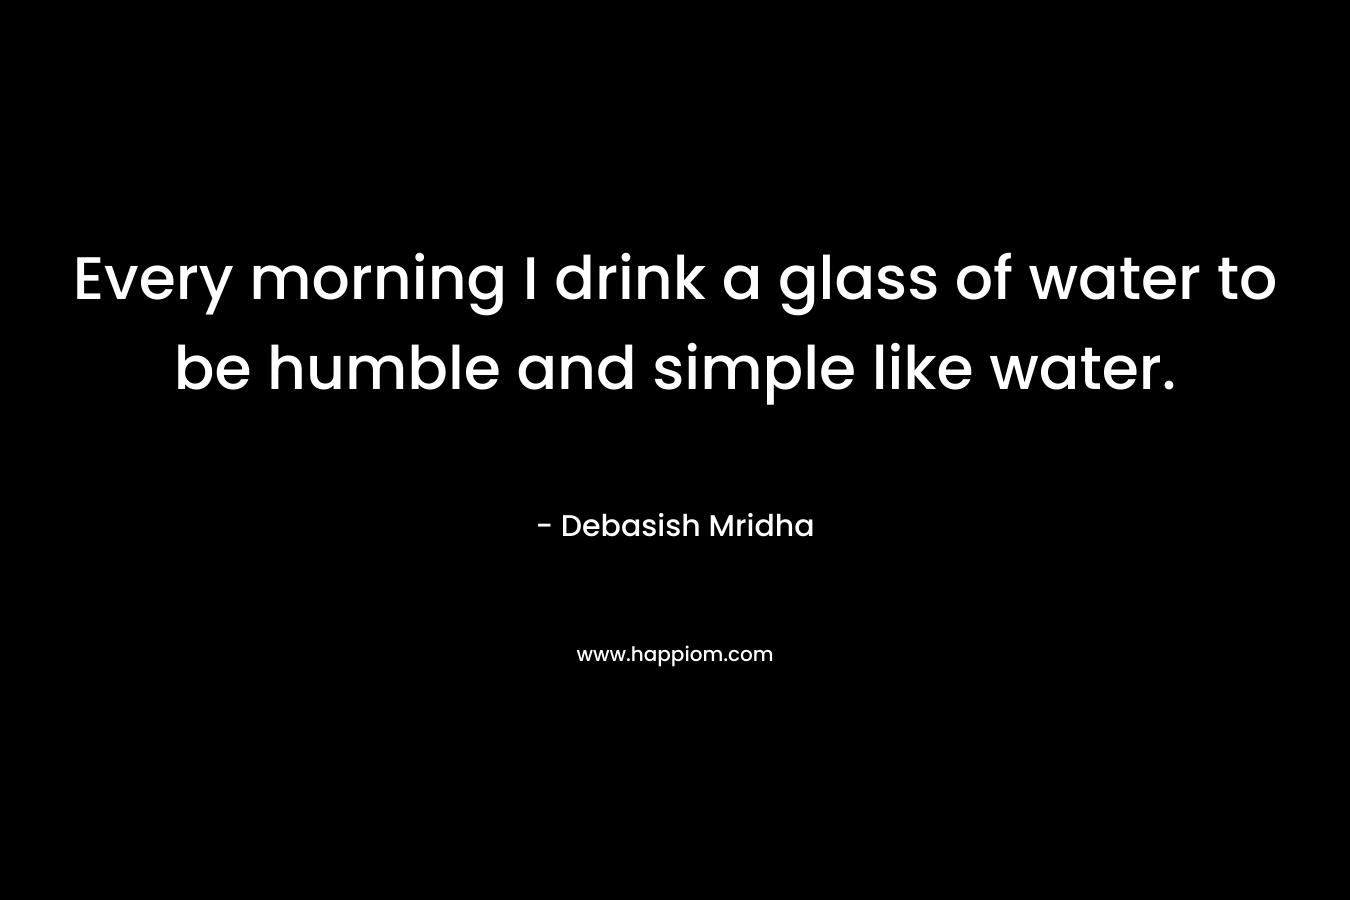 Every morning I drink a glass of water to be humble and simple like water.